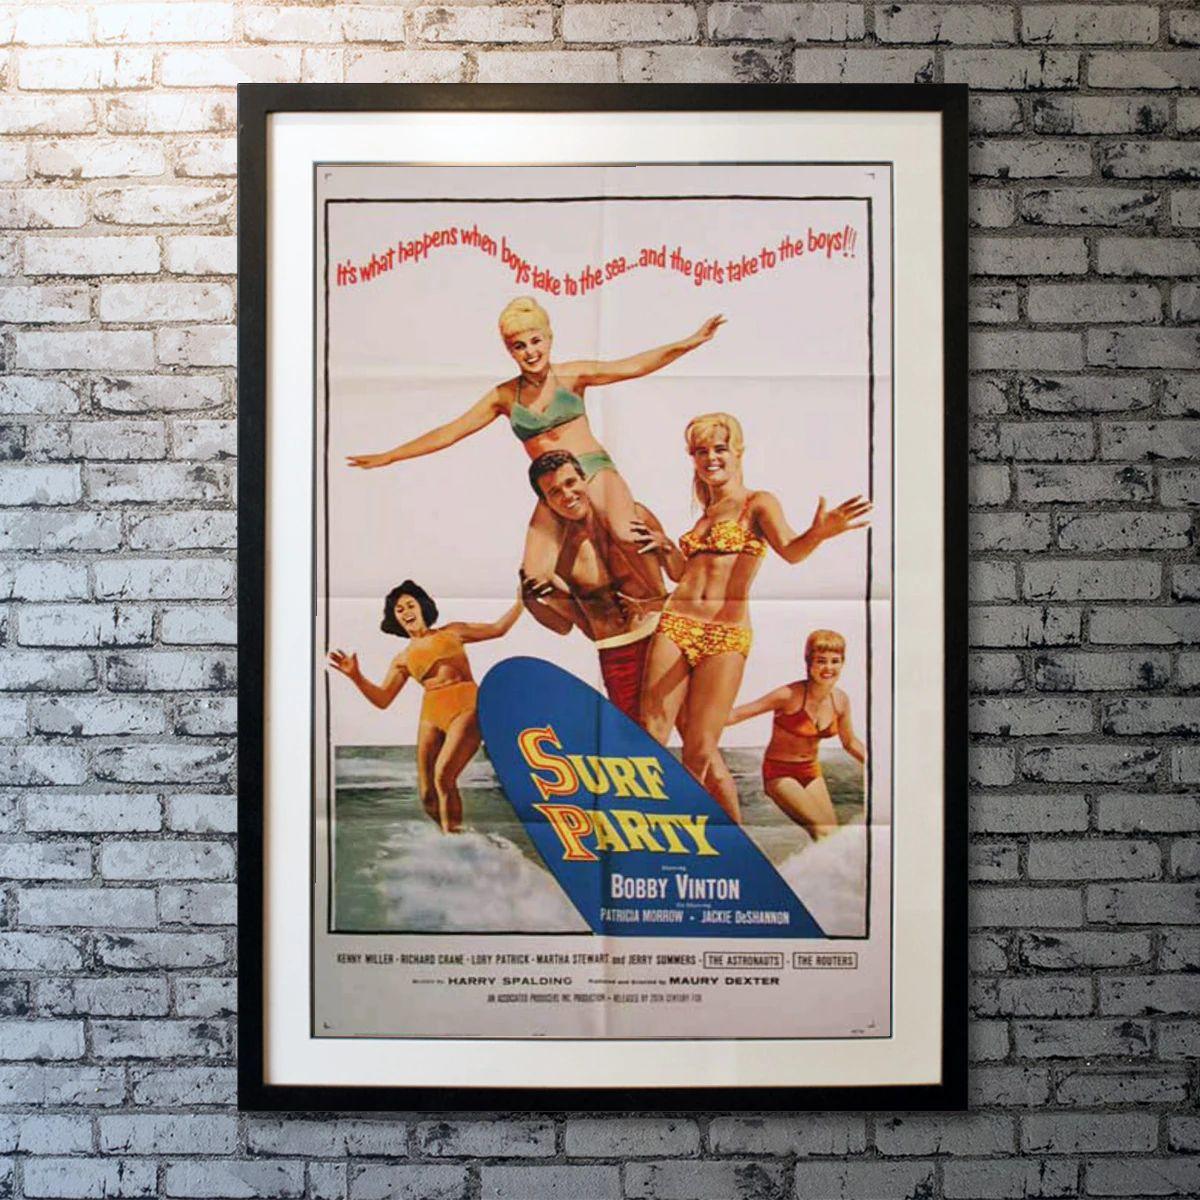 Surf Party, Unframed Poster, 1964

Original One Sheet (27 x 41 inches). A young girl travels to California with a couple of friends in order to visit her brother, whom she hasn't seen for some time. After they arrive it doesn't take long for them